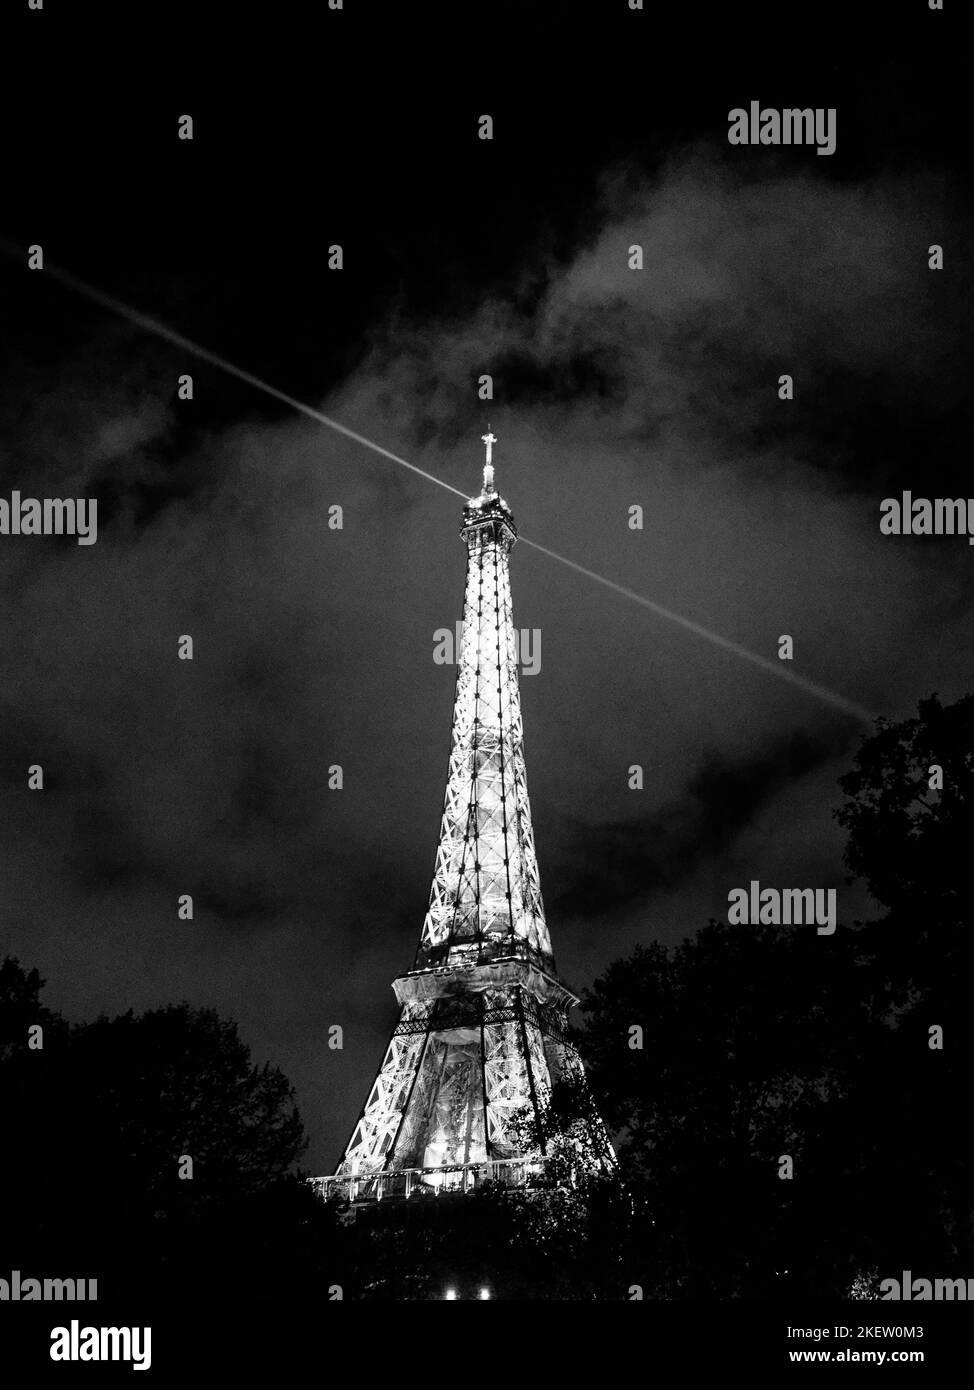 Black and White Landscape of Eiffel Tower, Paris, France, Europe. Stock Photo